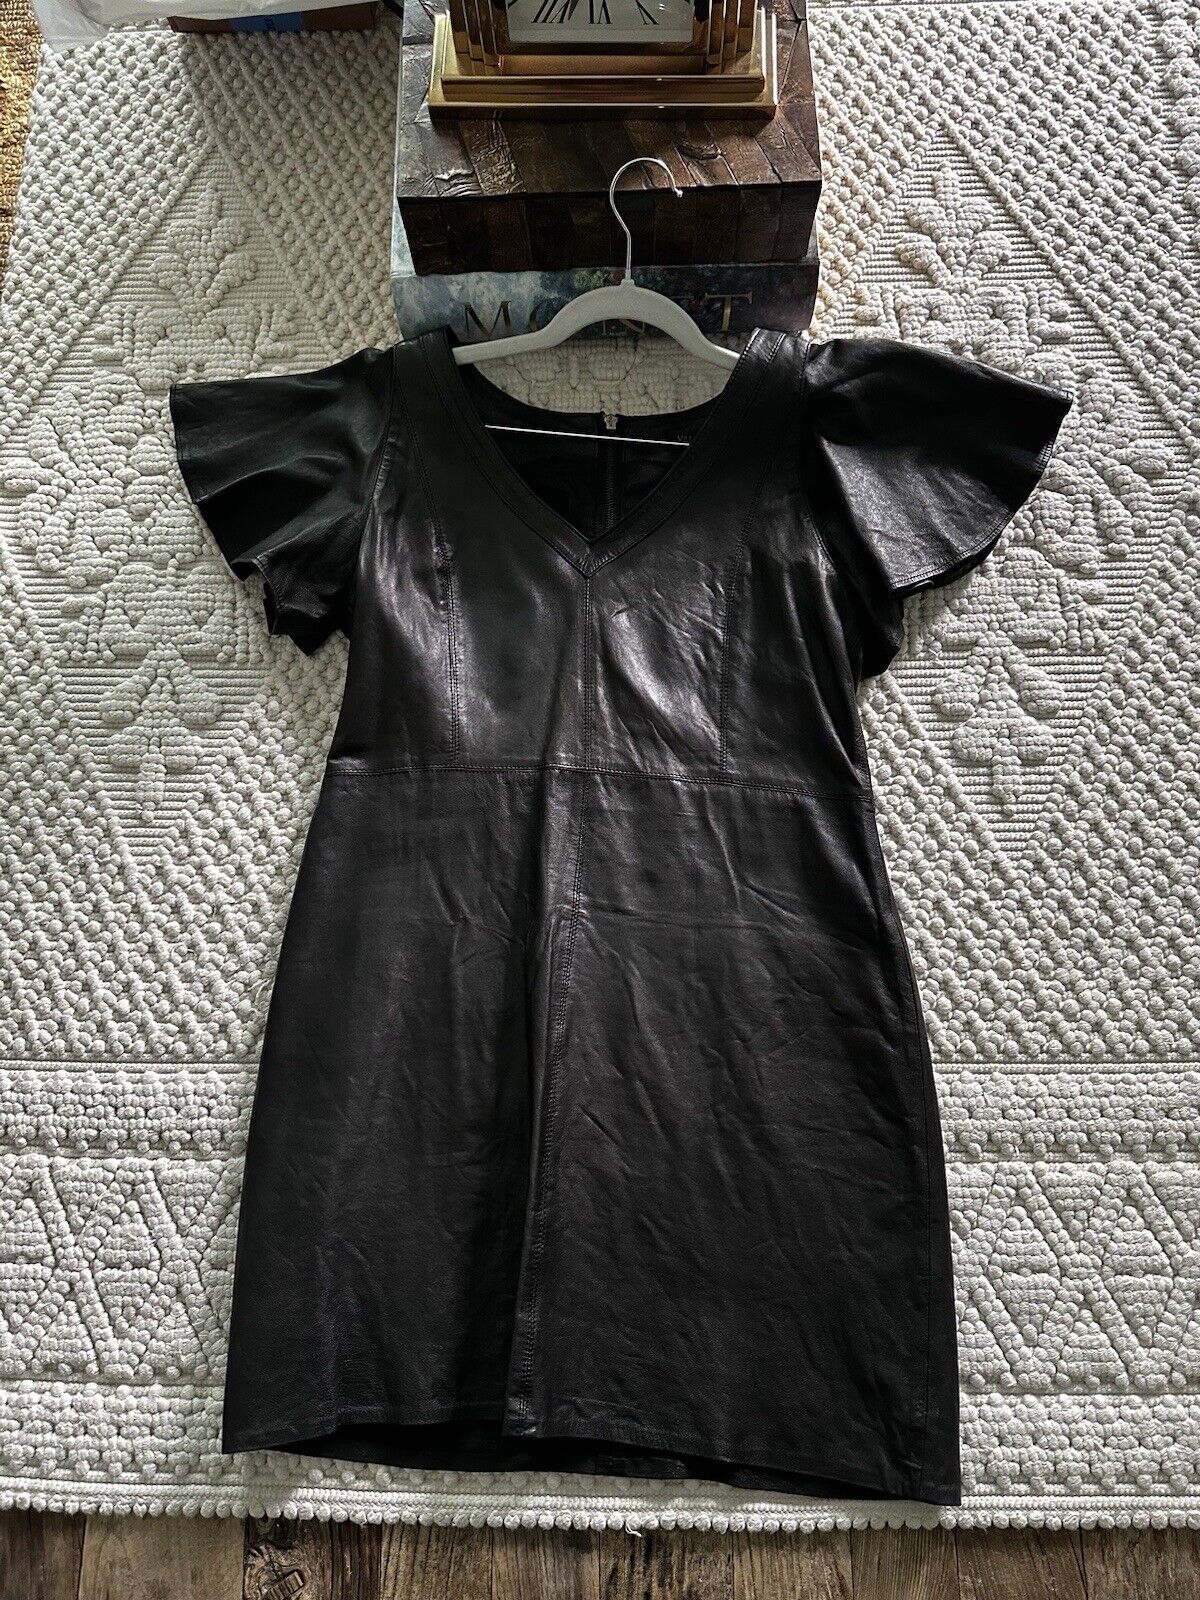 Valentino Short Sleeve Lace Puff-Sleeve Leather Dress in Black - ORIGINAL $2000